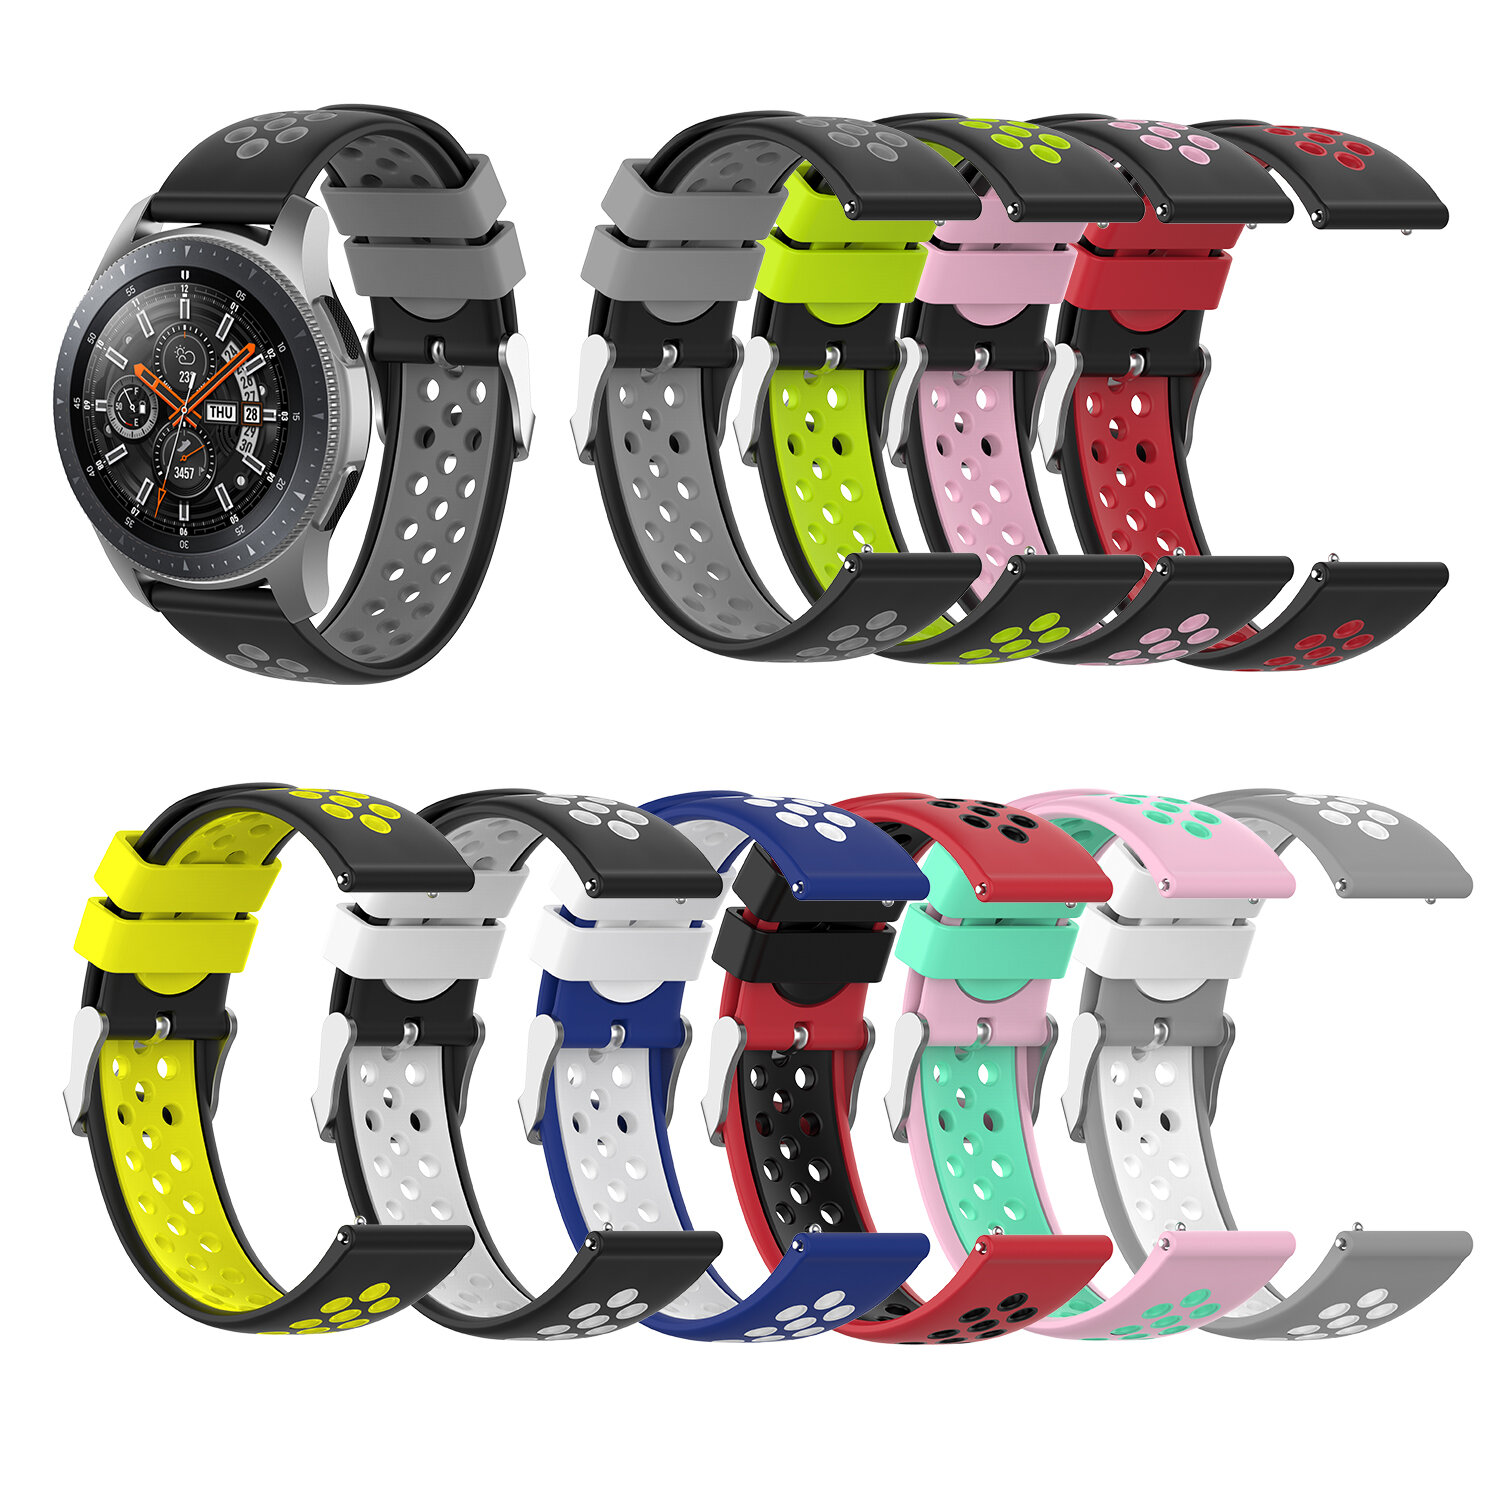 Bakeey Two-color Breathable Waterproof Replacement Strap Smart Watch Band For Samsung Galaxy Watch 46MM